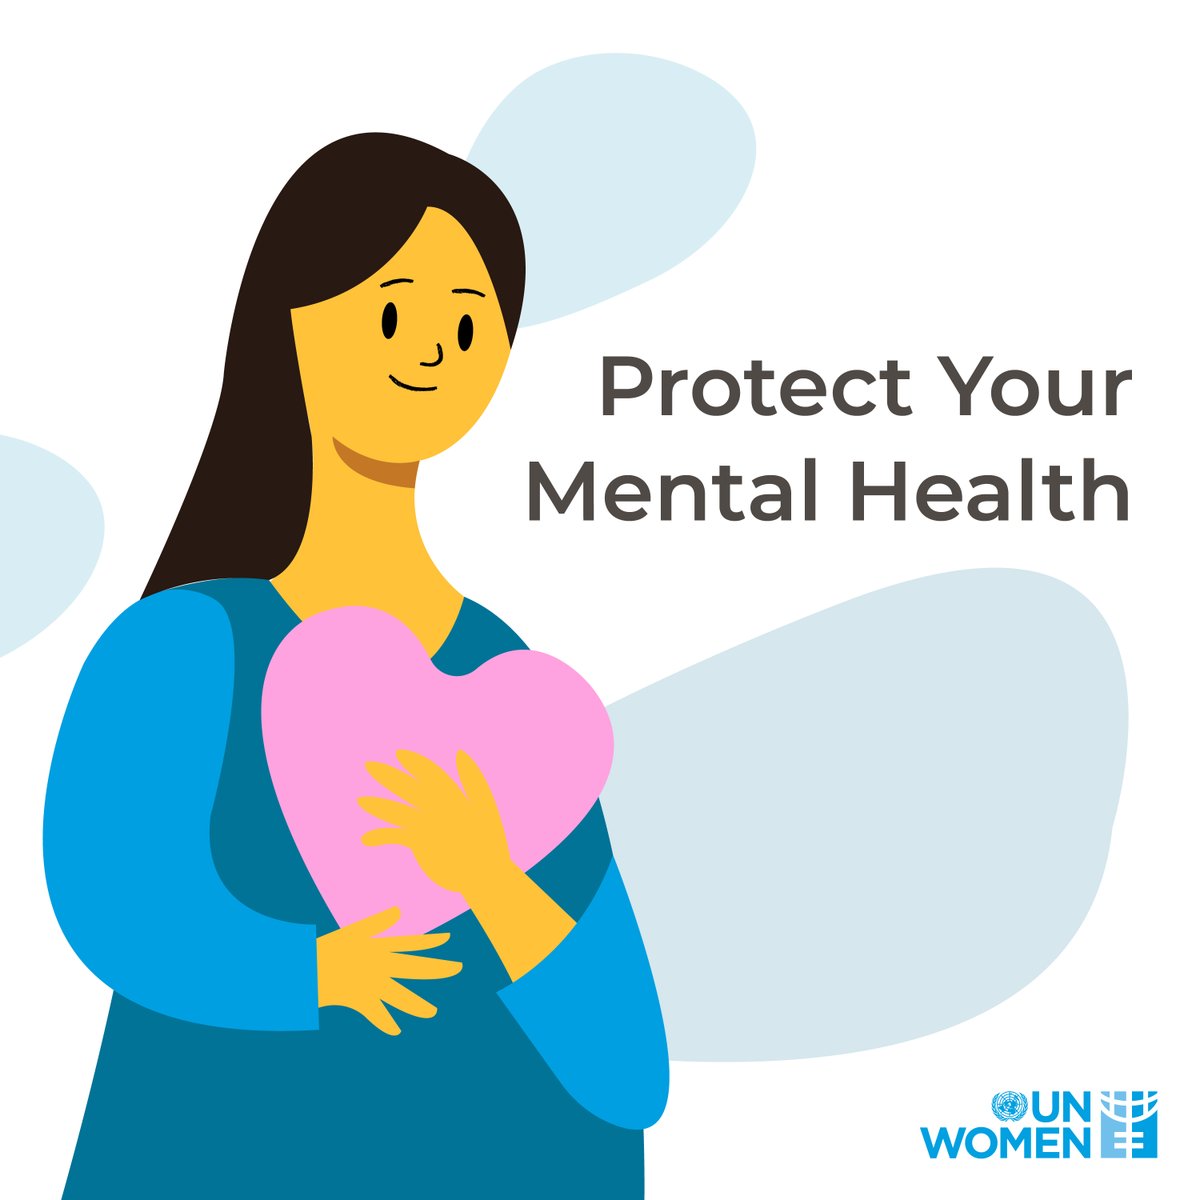 Prioritize your mental well-being! 💆‍♀️💪 We stand with you in recognizing the importance of self-care and seeking support when needed. #MentalHealthMatters